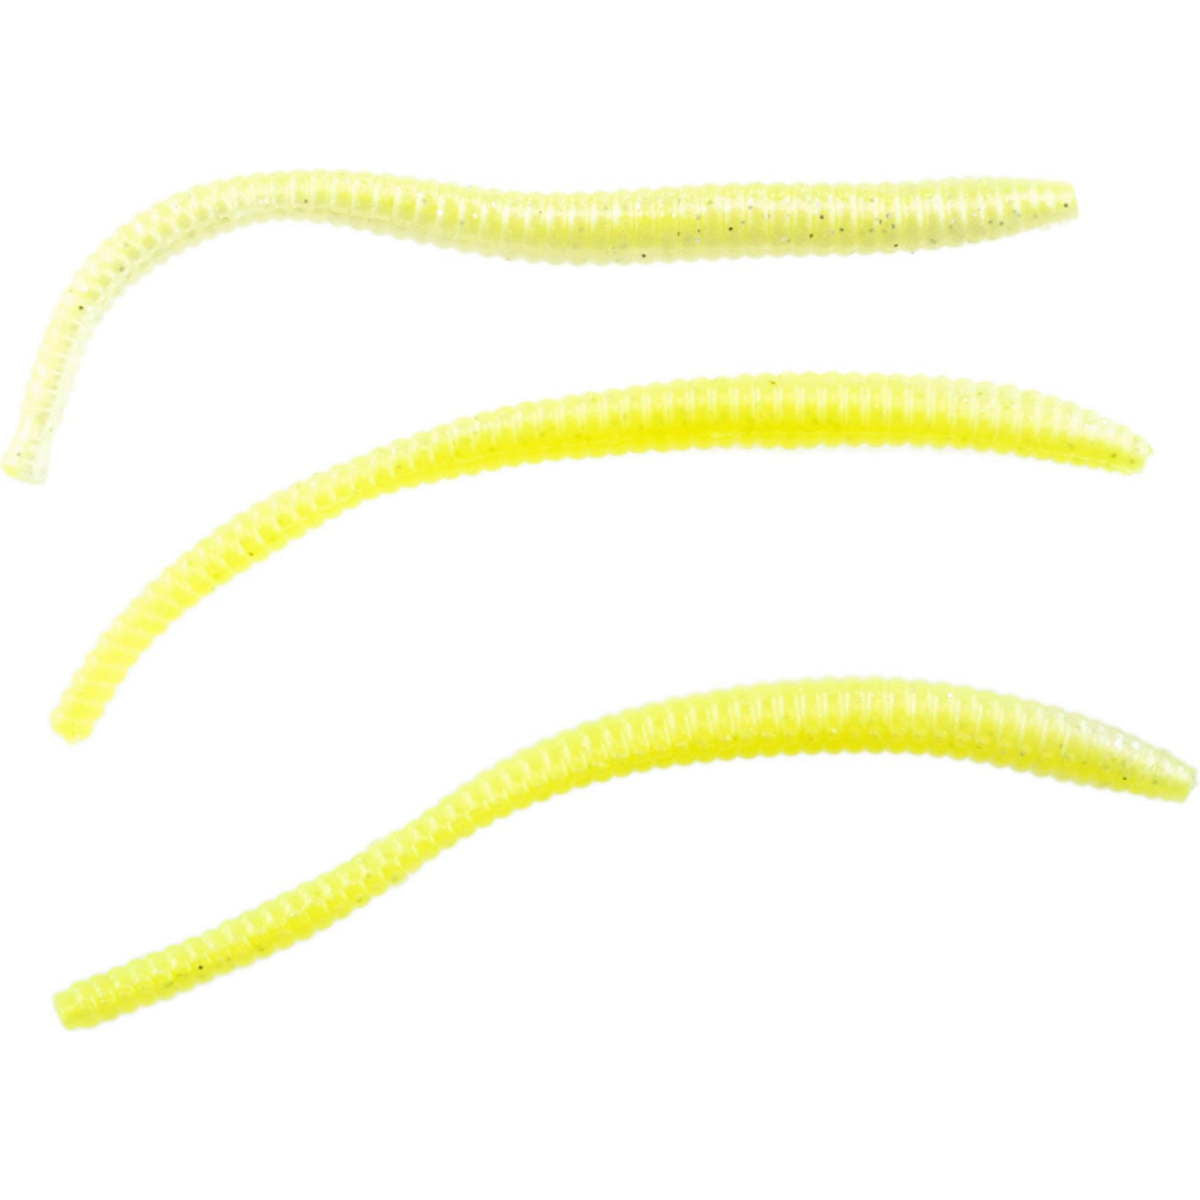 Photo of Berkley PowerBait Power Floating Trout Worm for sale at United Tackle Shops.